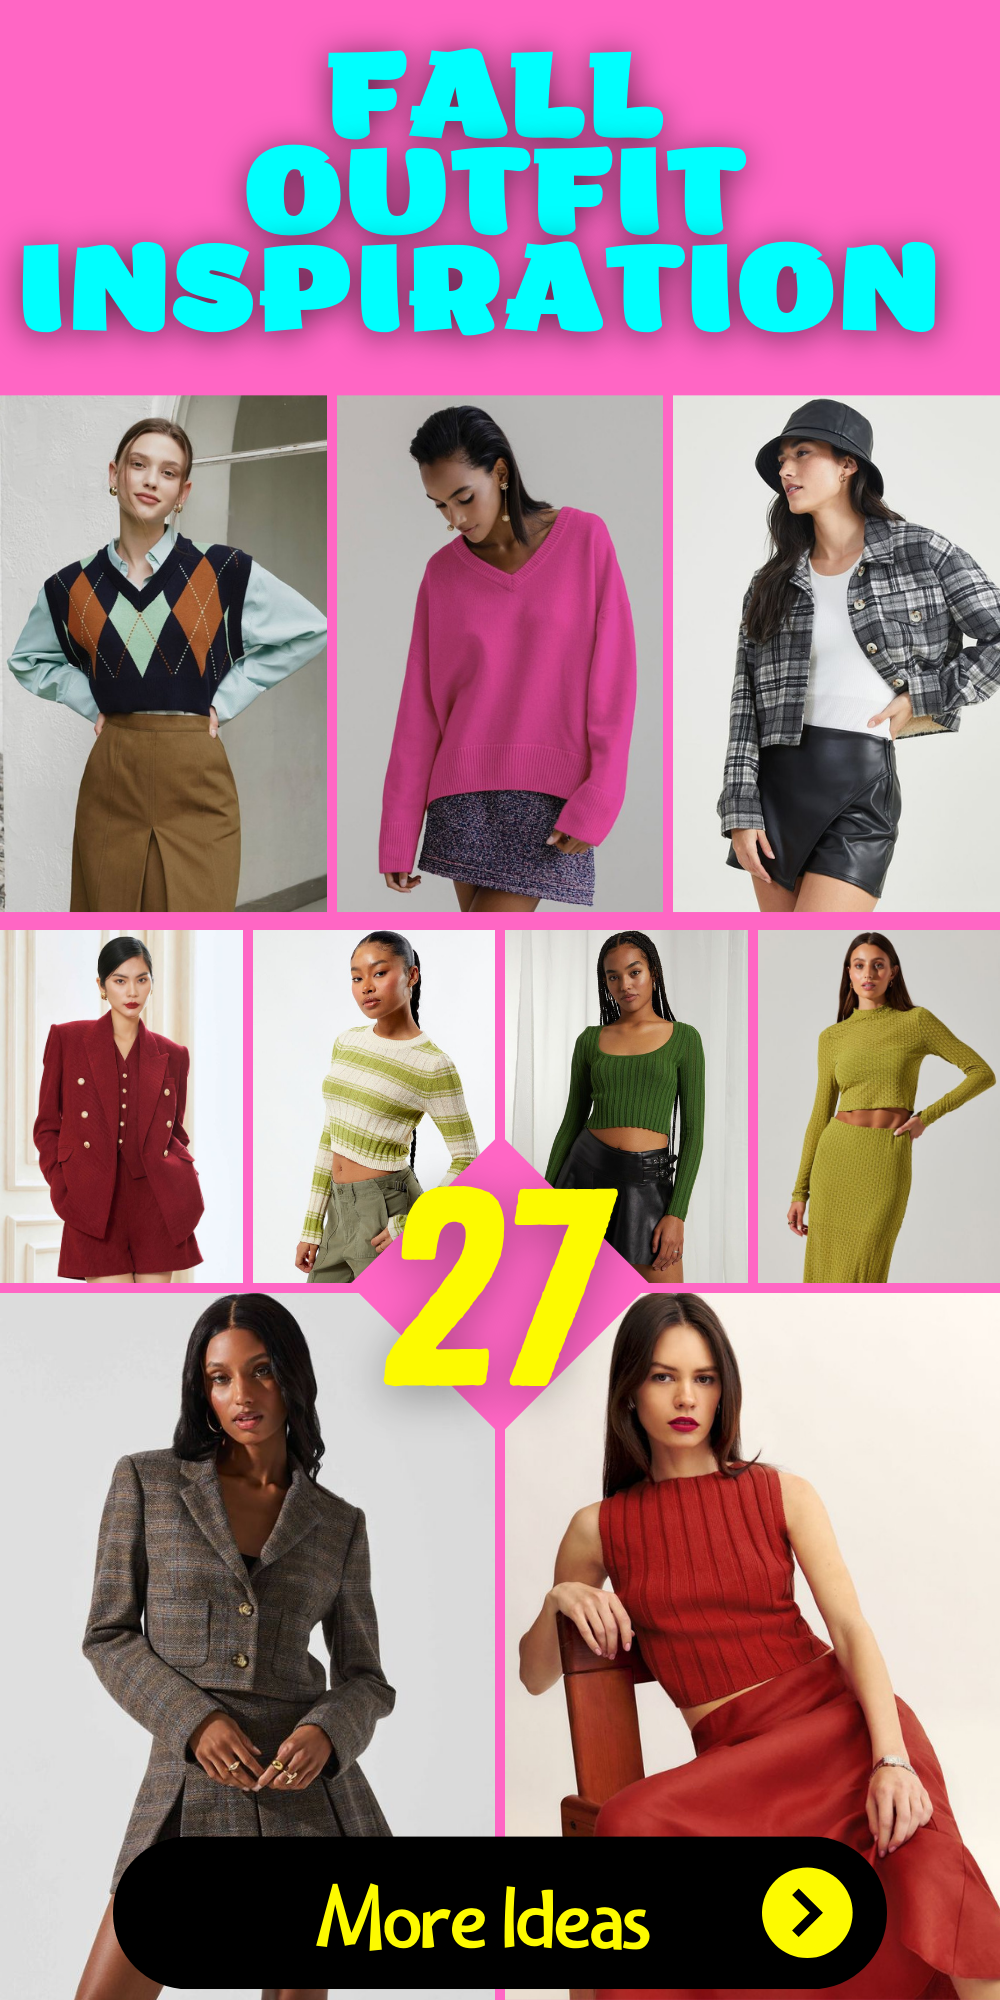 27 Fall Outfit Inspiration Ideas: Stylish Looks for the Season